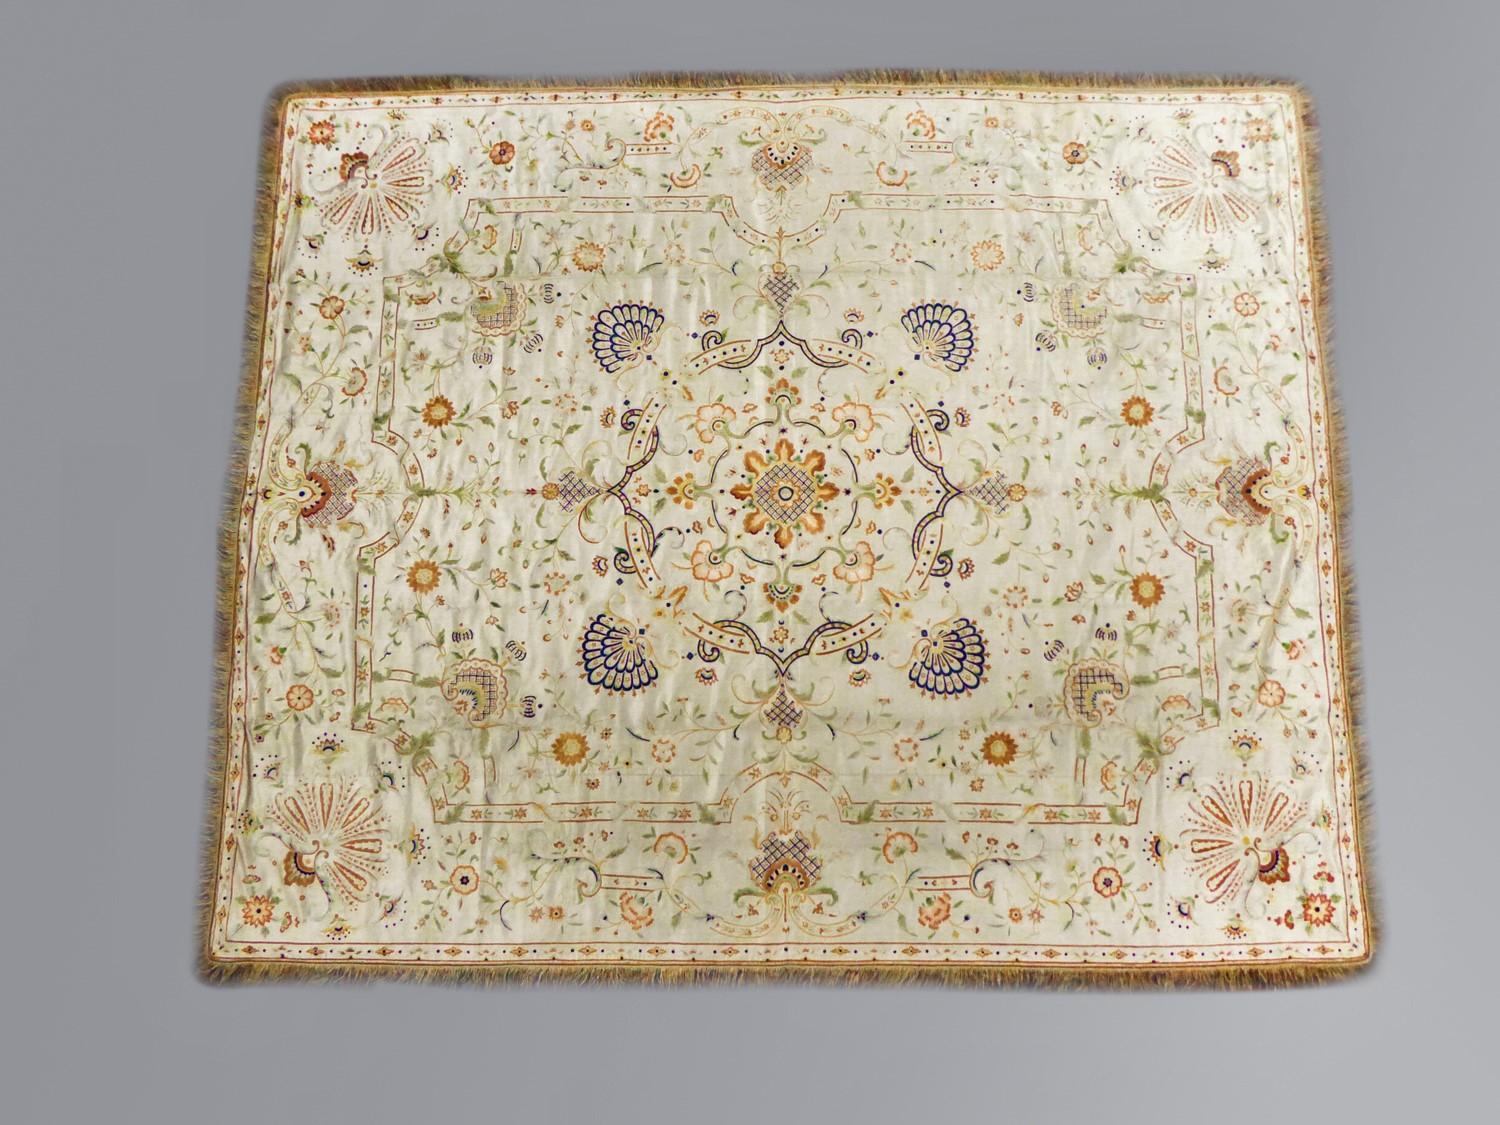 Circa 1780/1810
China for Export in Europe/Portugal

Large bedspread or hanging in cream satin embroidered with polychrome mercerized silk threads. Large orderly and architecturally decorated central medallion and spandrels. Stylized flowered